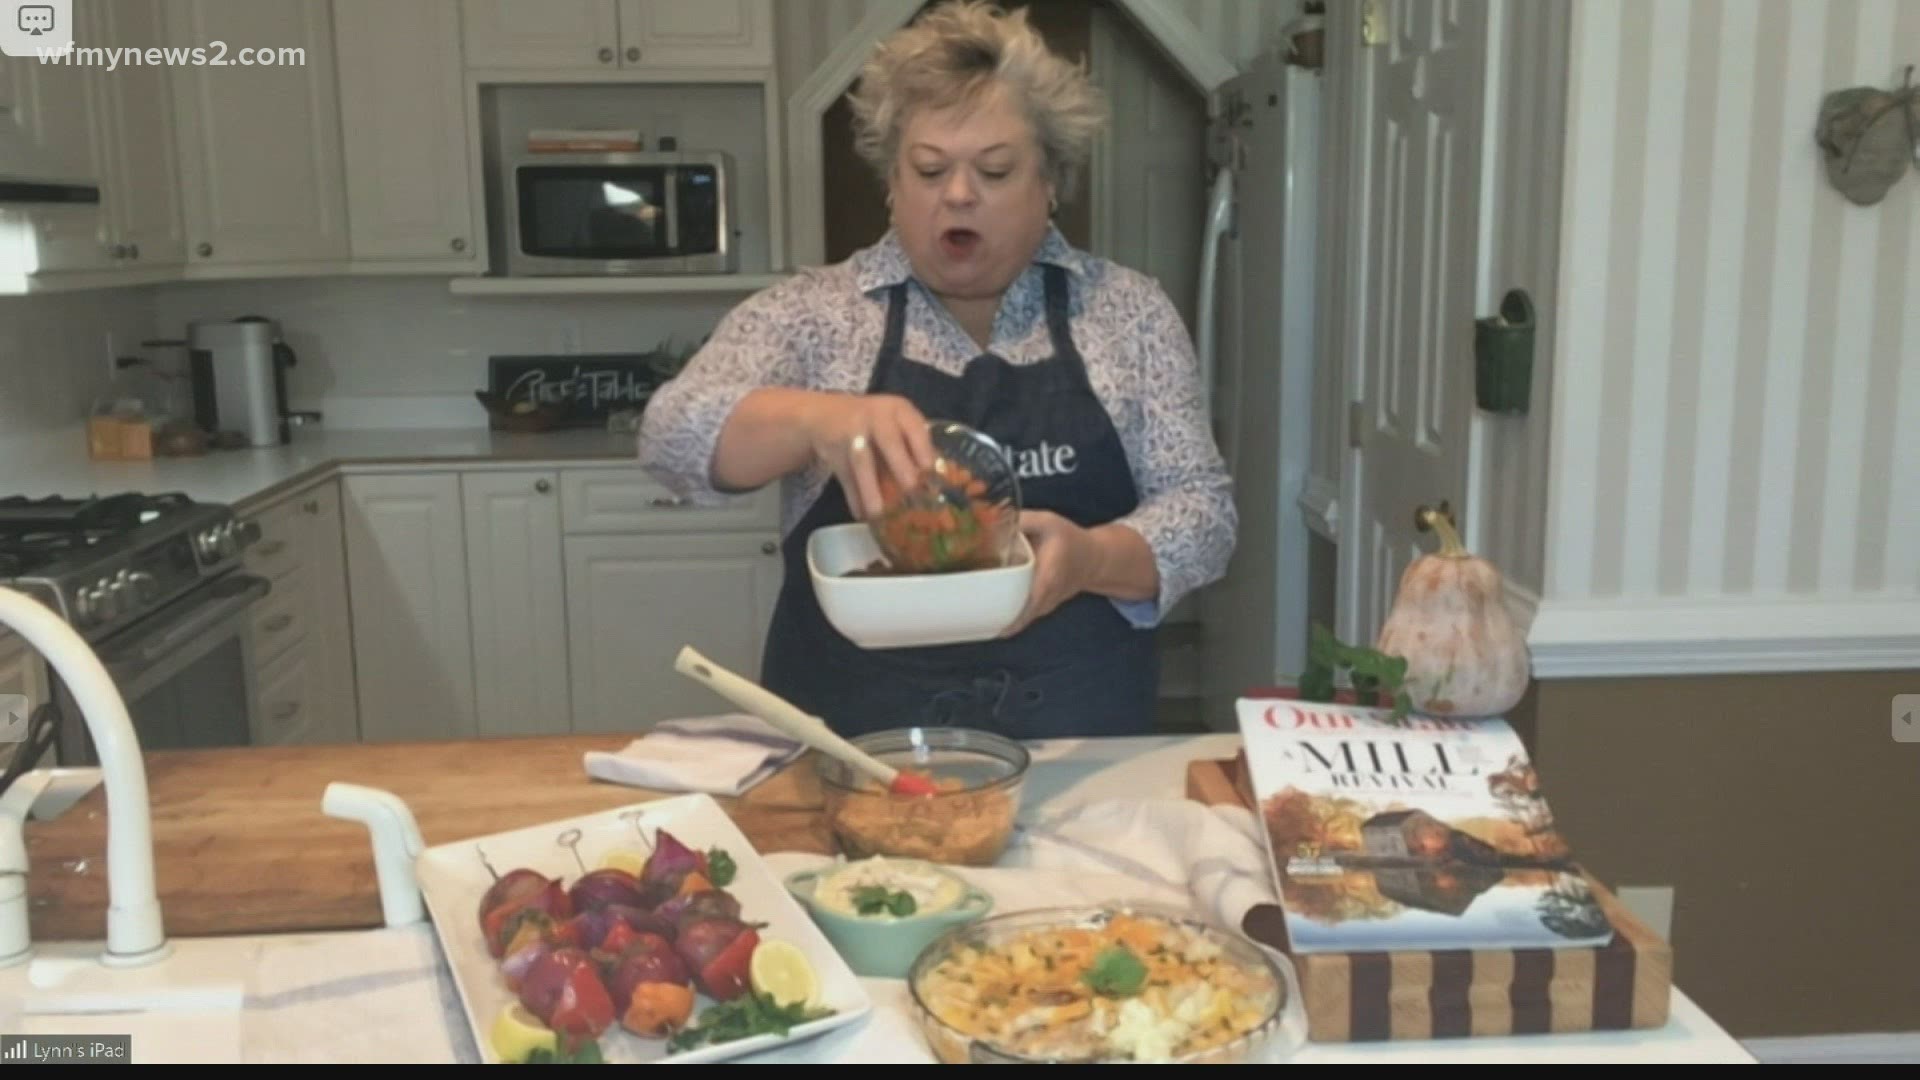 Chef Lynn Wells joins us from her kitchen to share some tasty recipes that will warm you up as we head into winter.